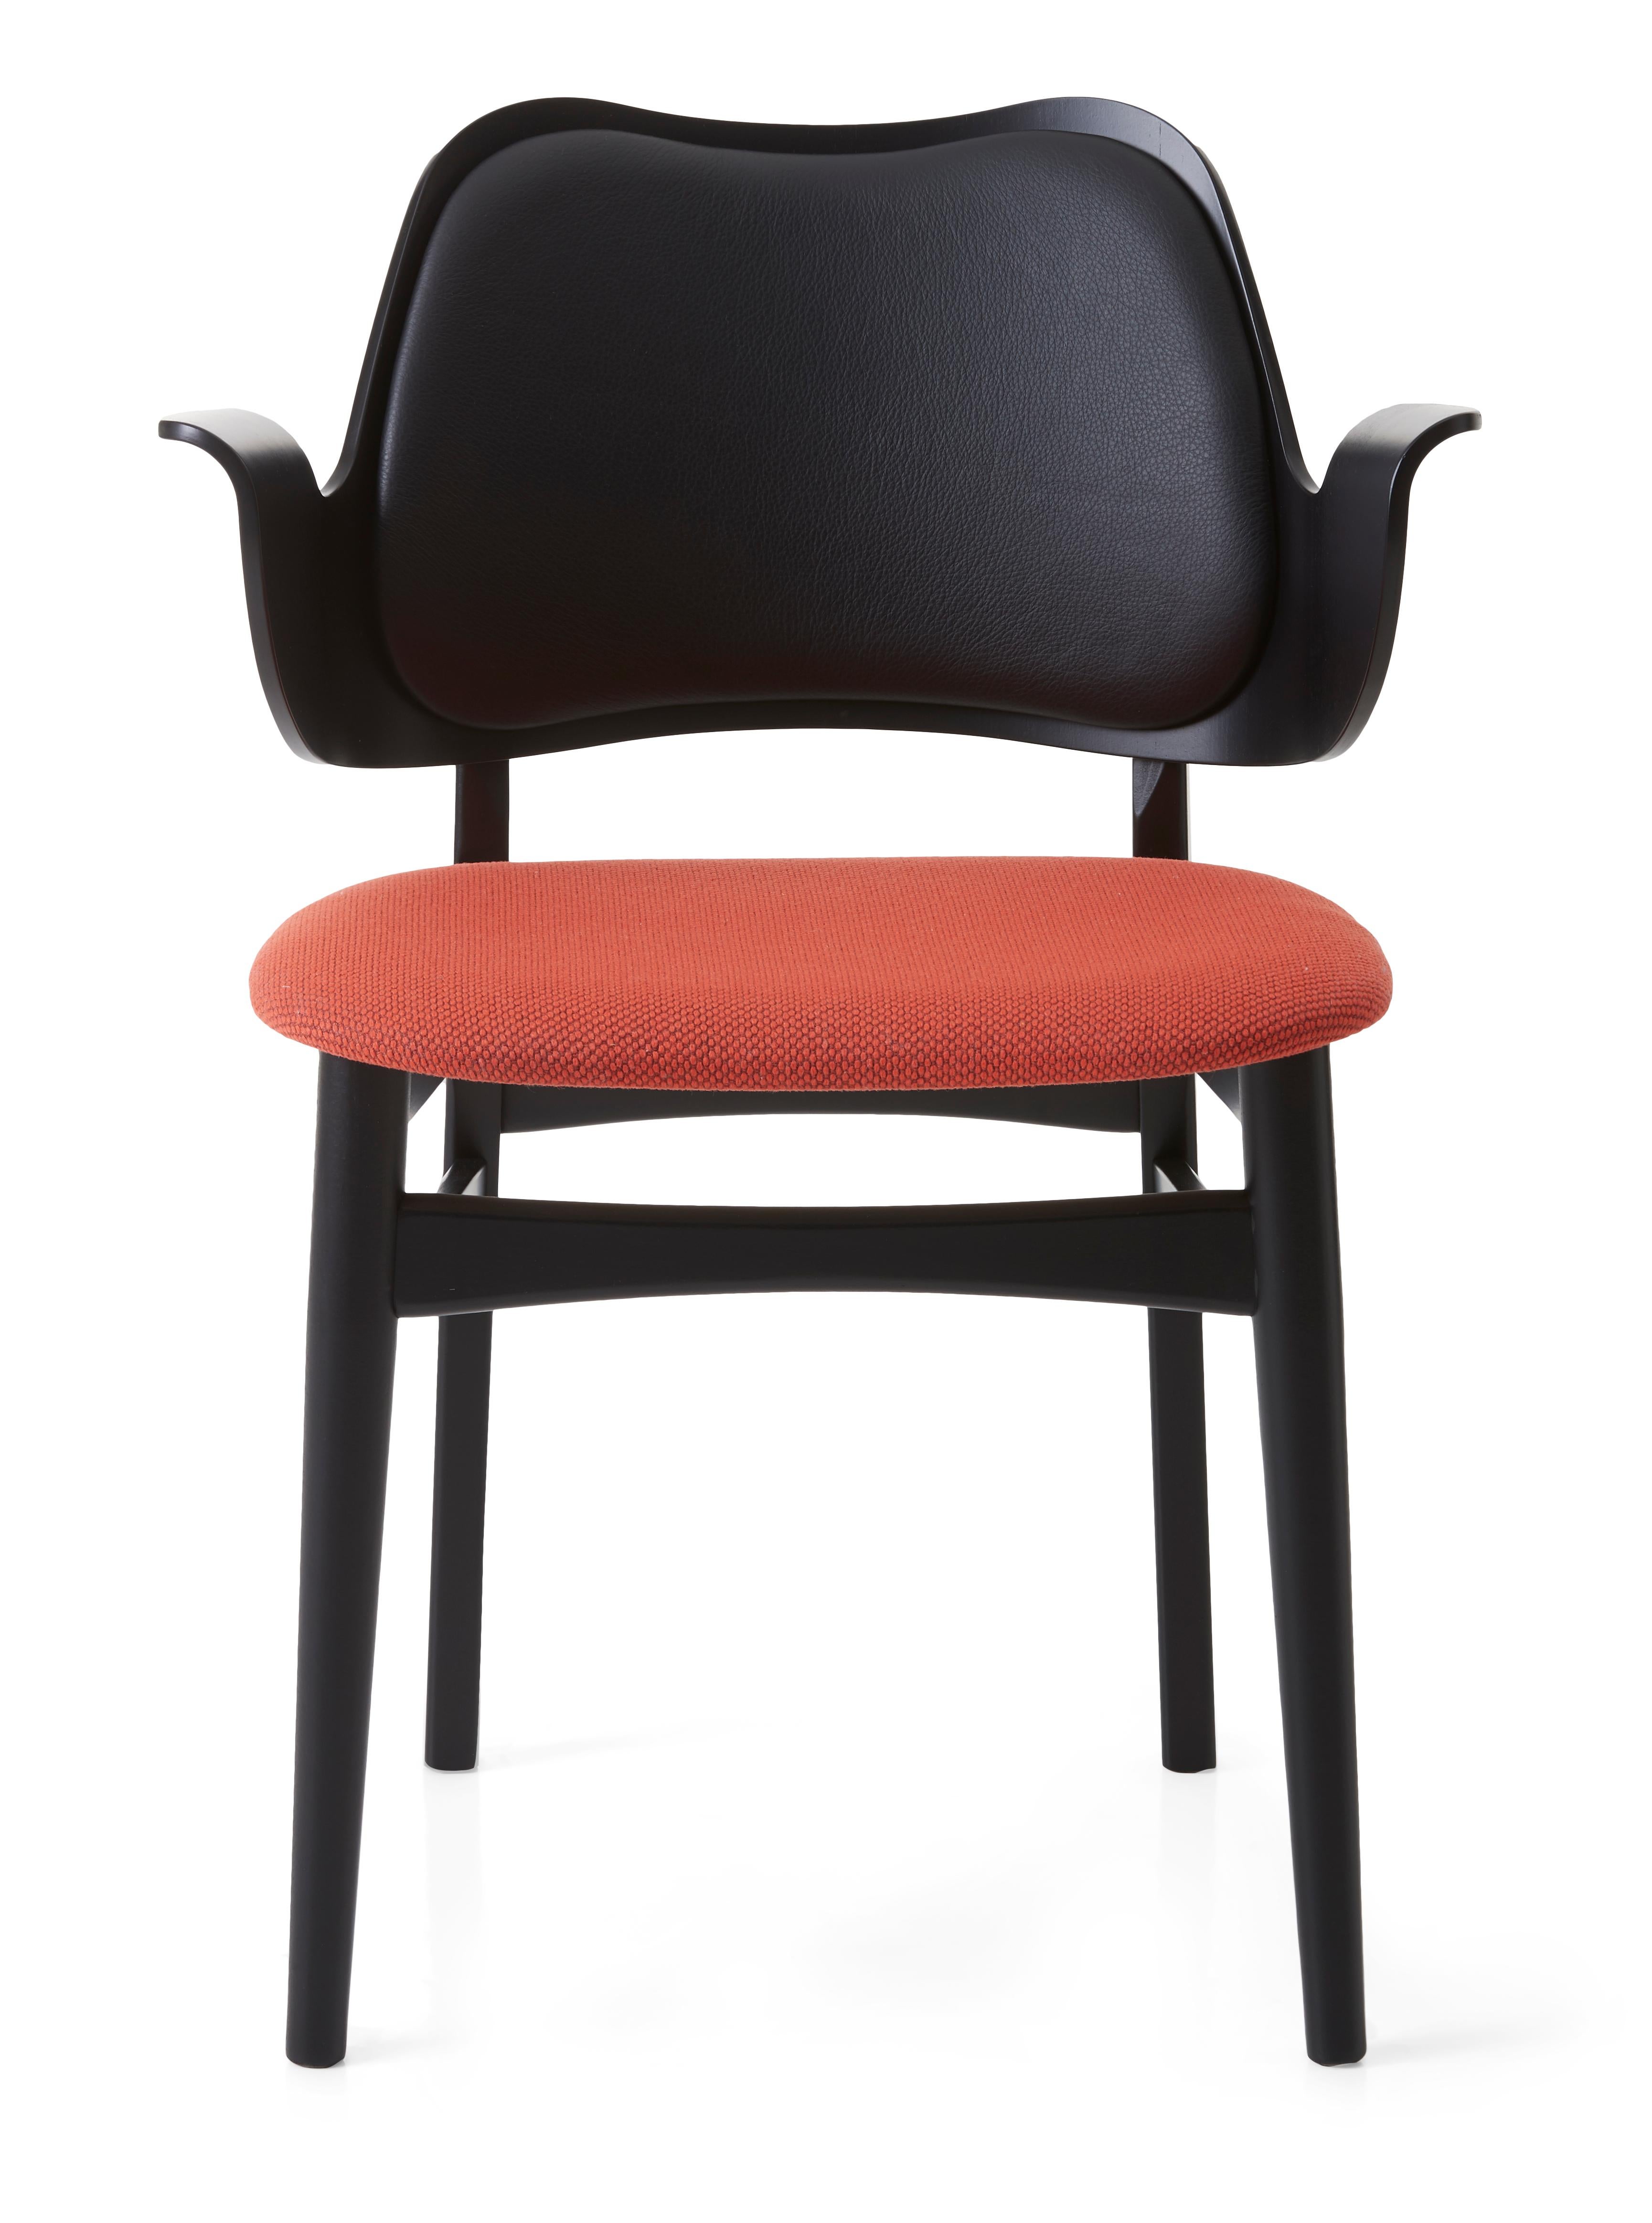 For Sale: Red (Pres207,Merit037) Gesture Two-Tone Fully Upholstered Chair in Black, by Hans Olsen for Warm Nordic